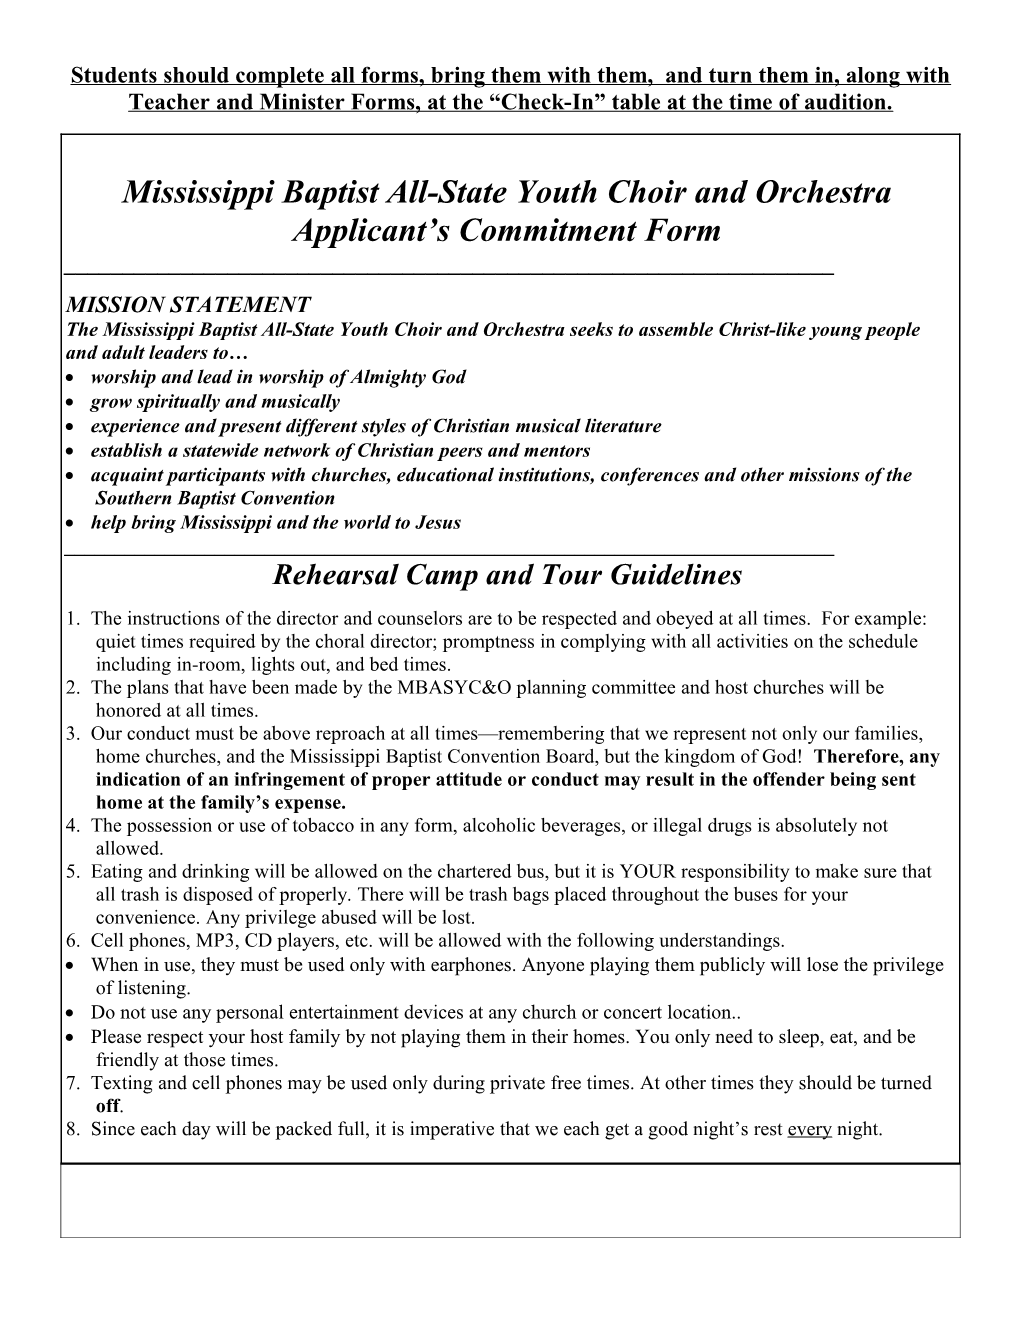 Mississippi Baptist All-State Youth Choir and Orchestra Applicant S Commitment Form